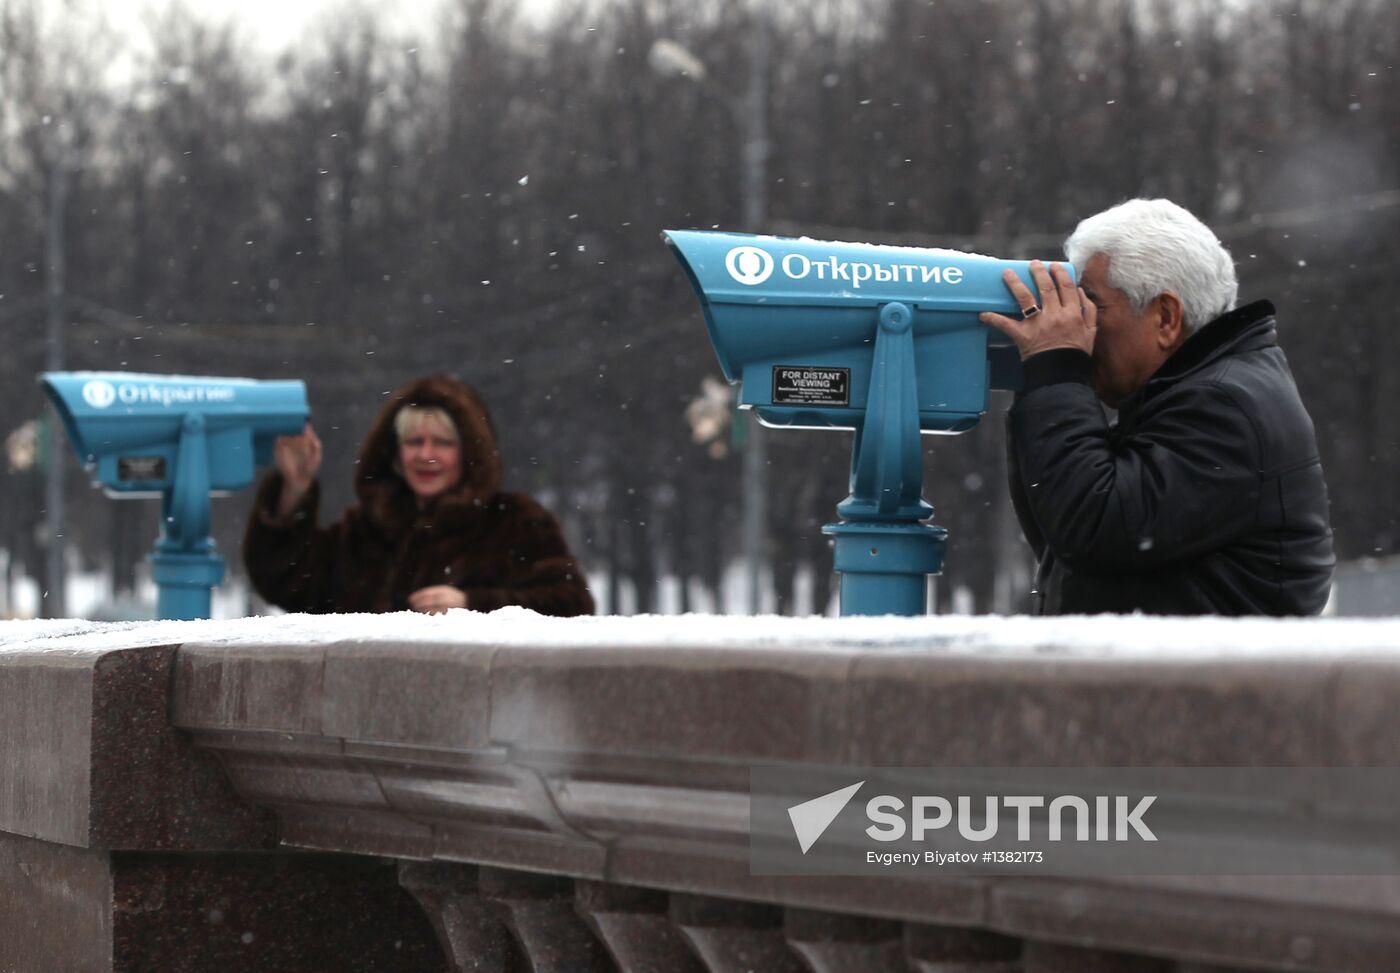 Stationary binoculars installed on Moscow's Sparrow Hills